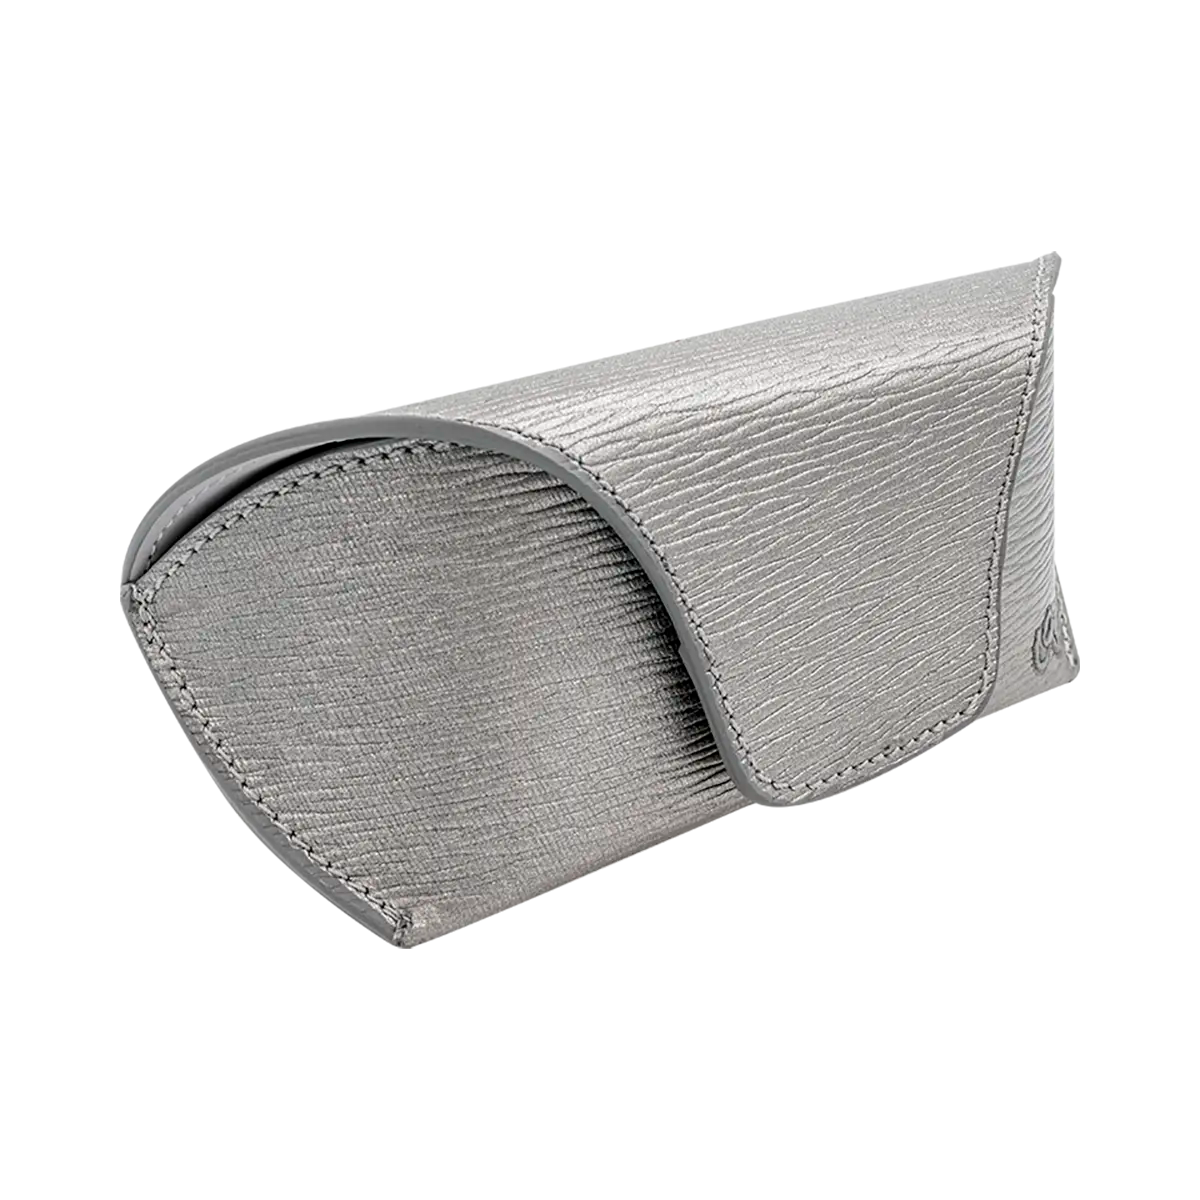 silver leather sunglasses case for women. Shop now in San Diego, CA.